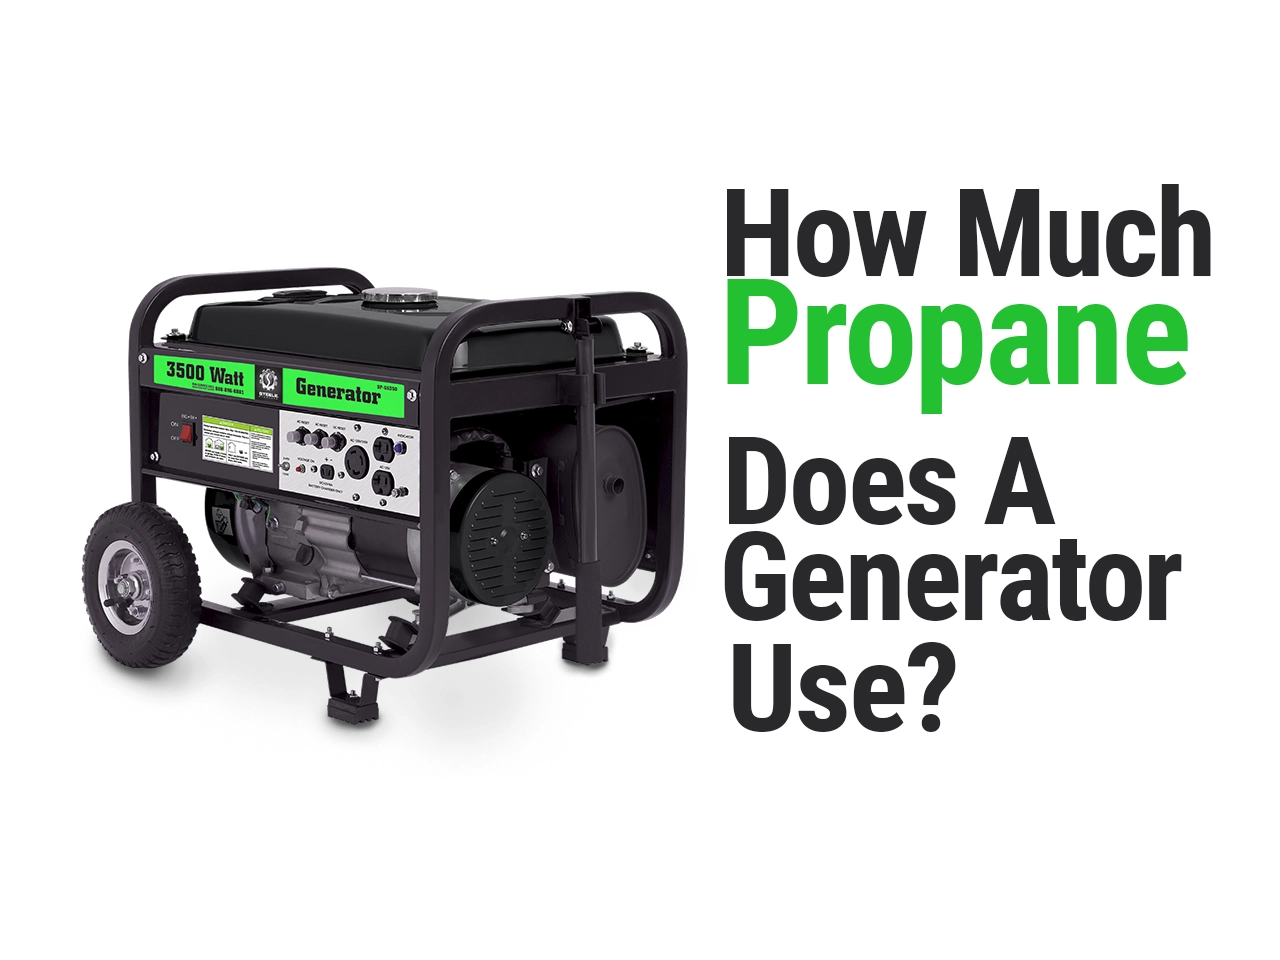 How Much Propane Does A Generator Use